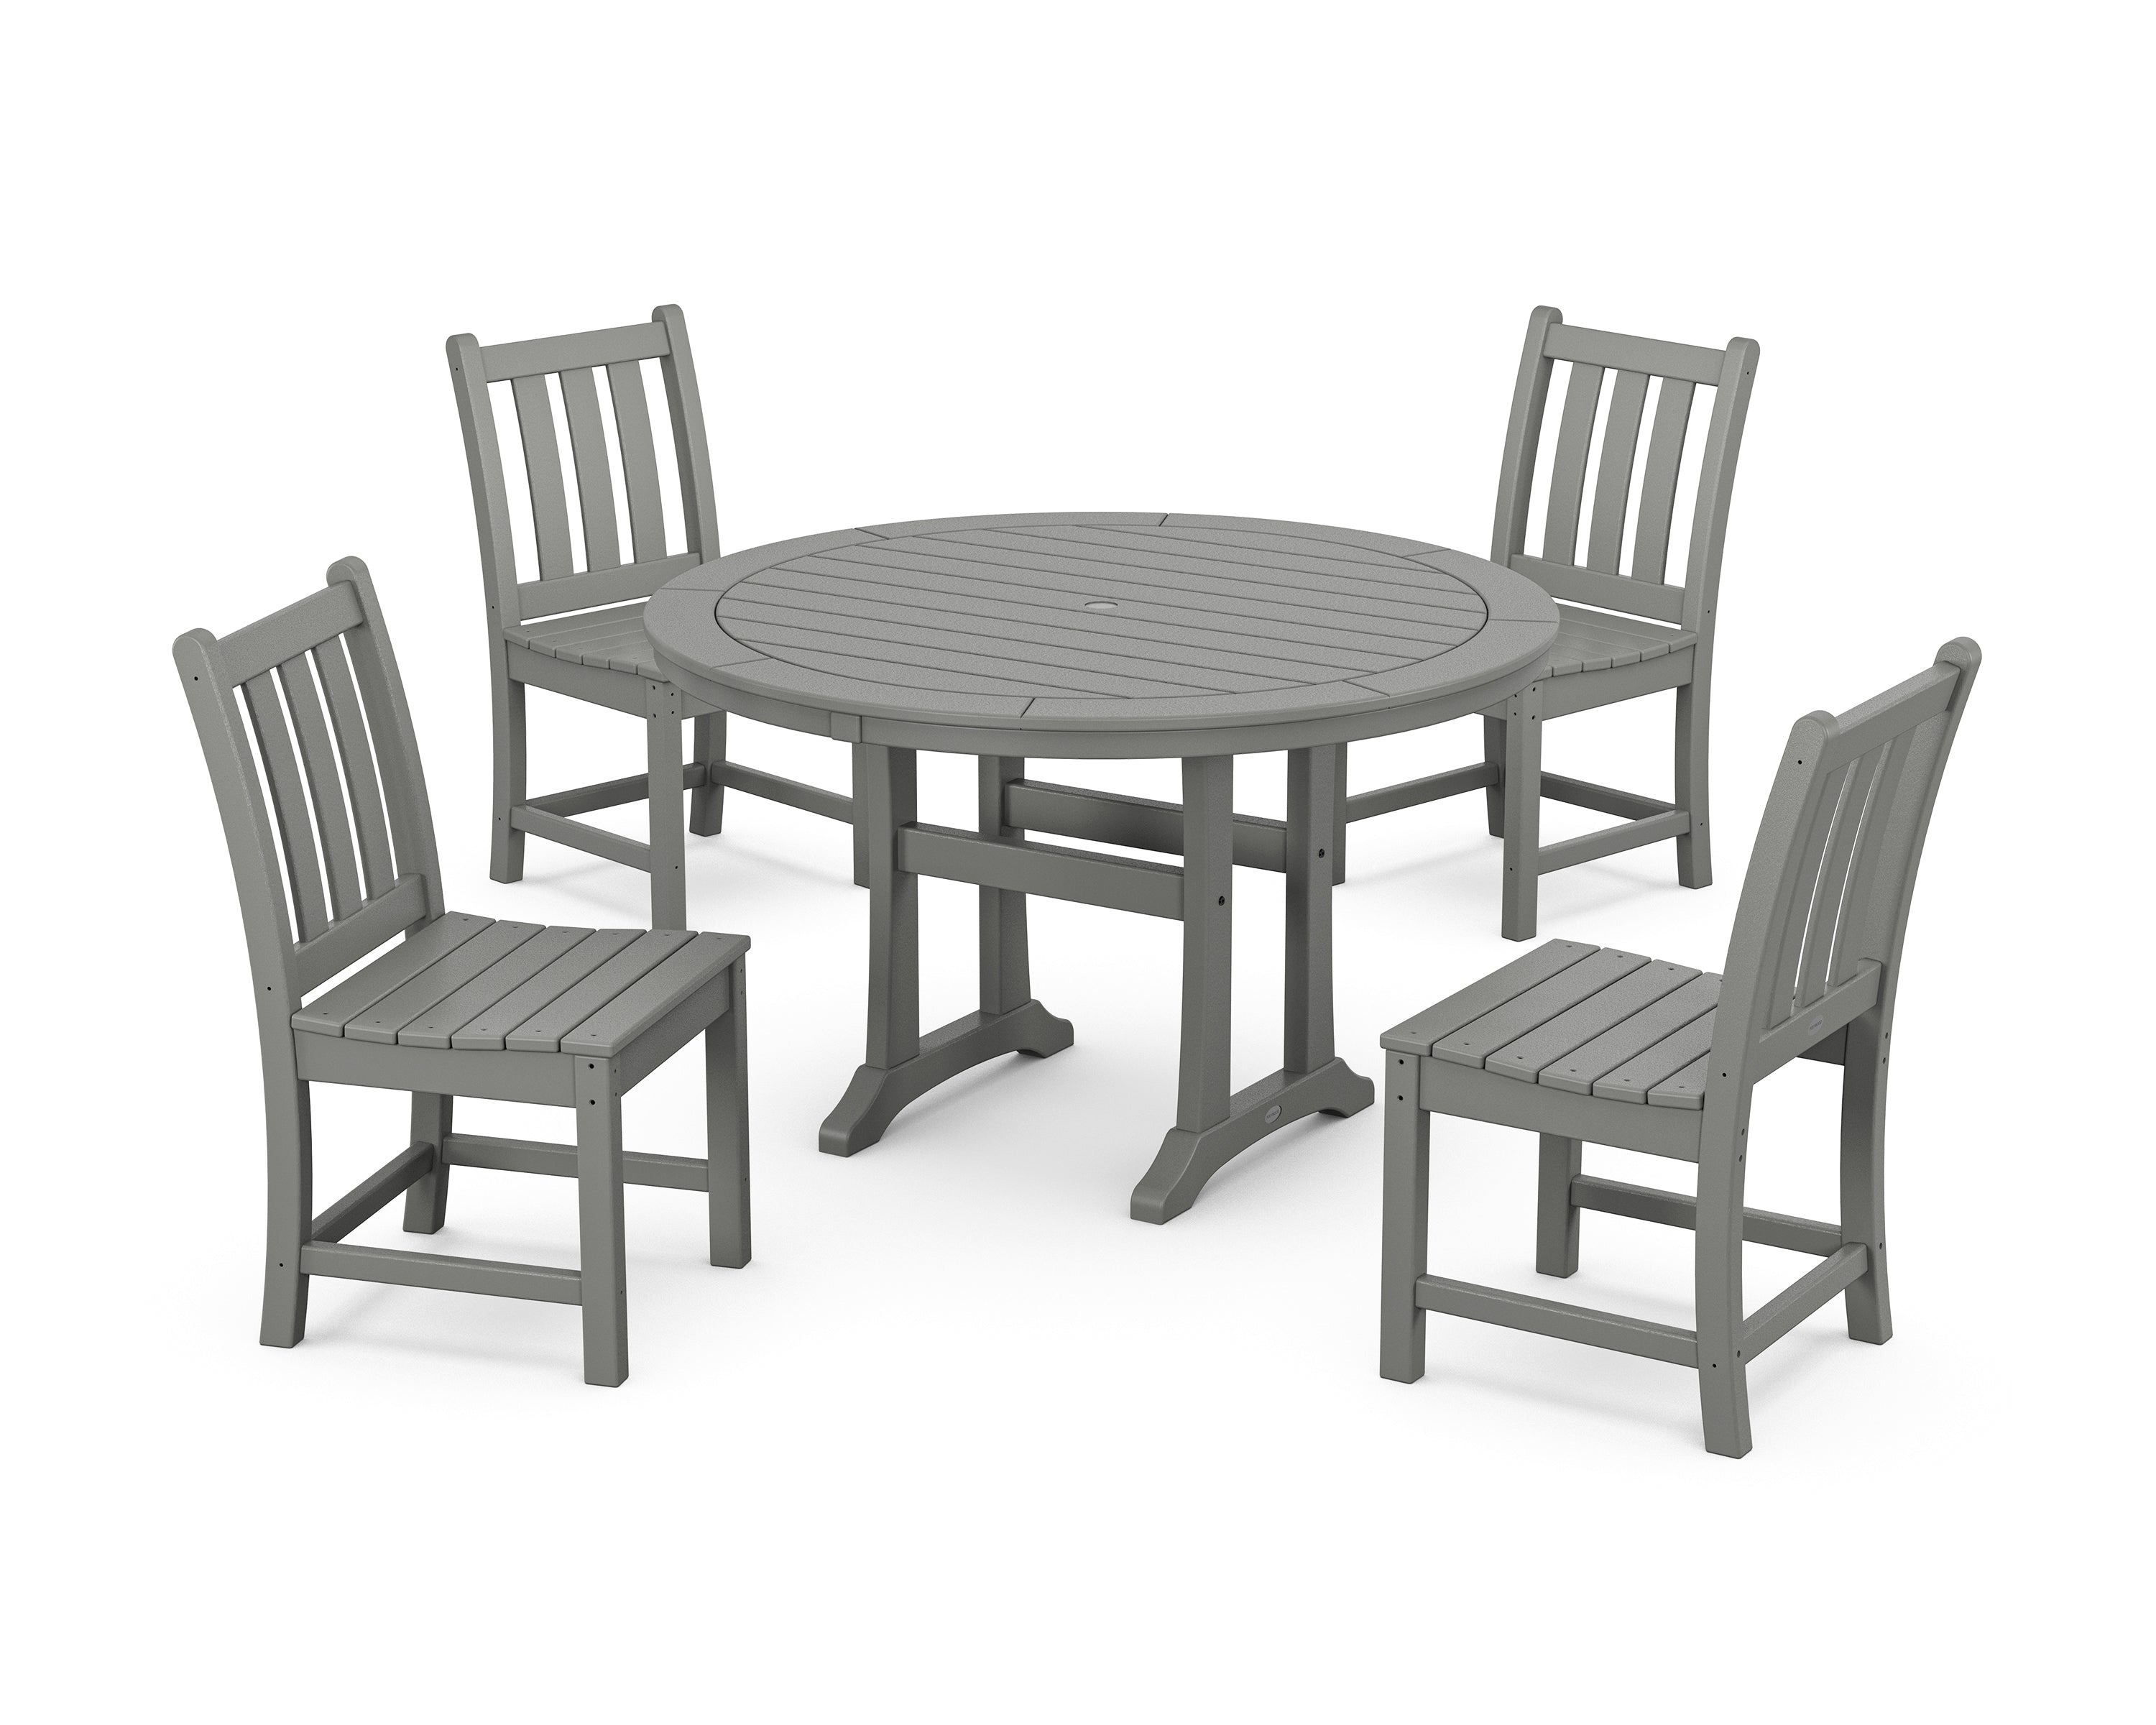 POLYWOOD® Traditional Garden Side Chair 5-Piece Round Dining Set With Trestle Legs in Slate Grey